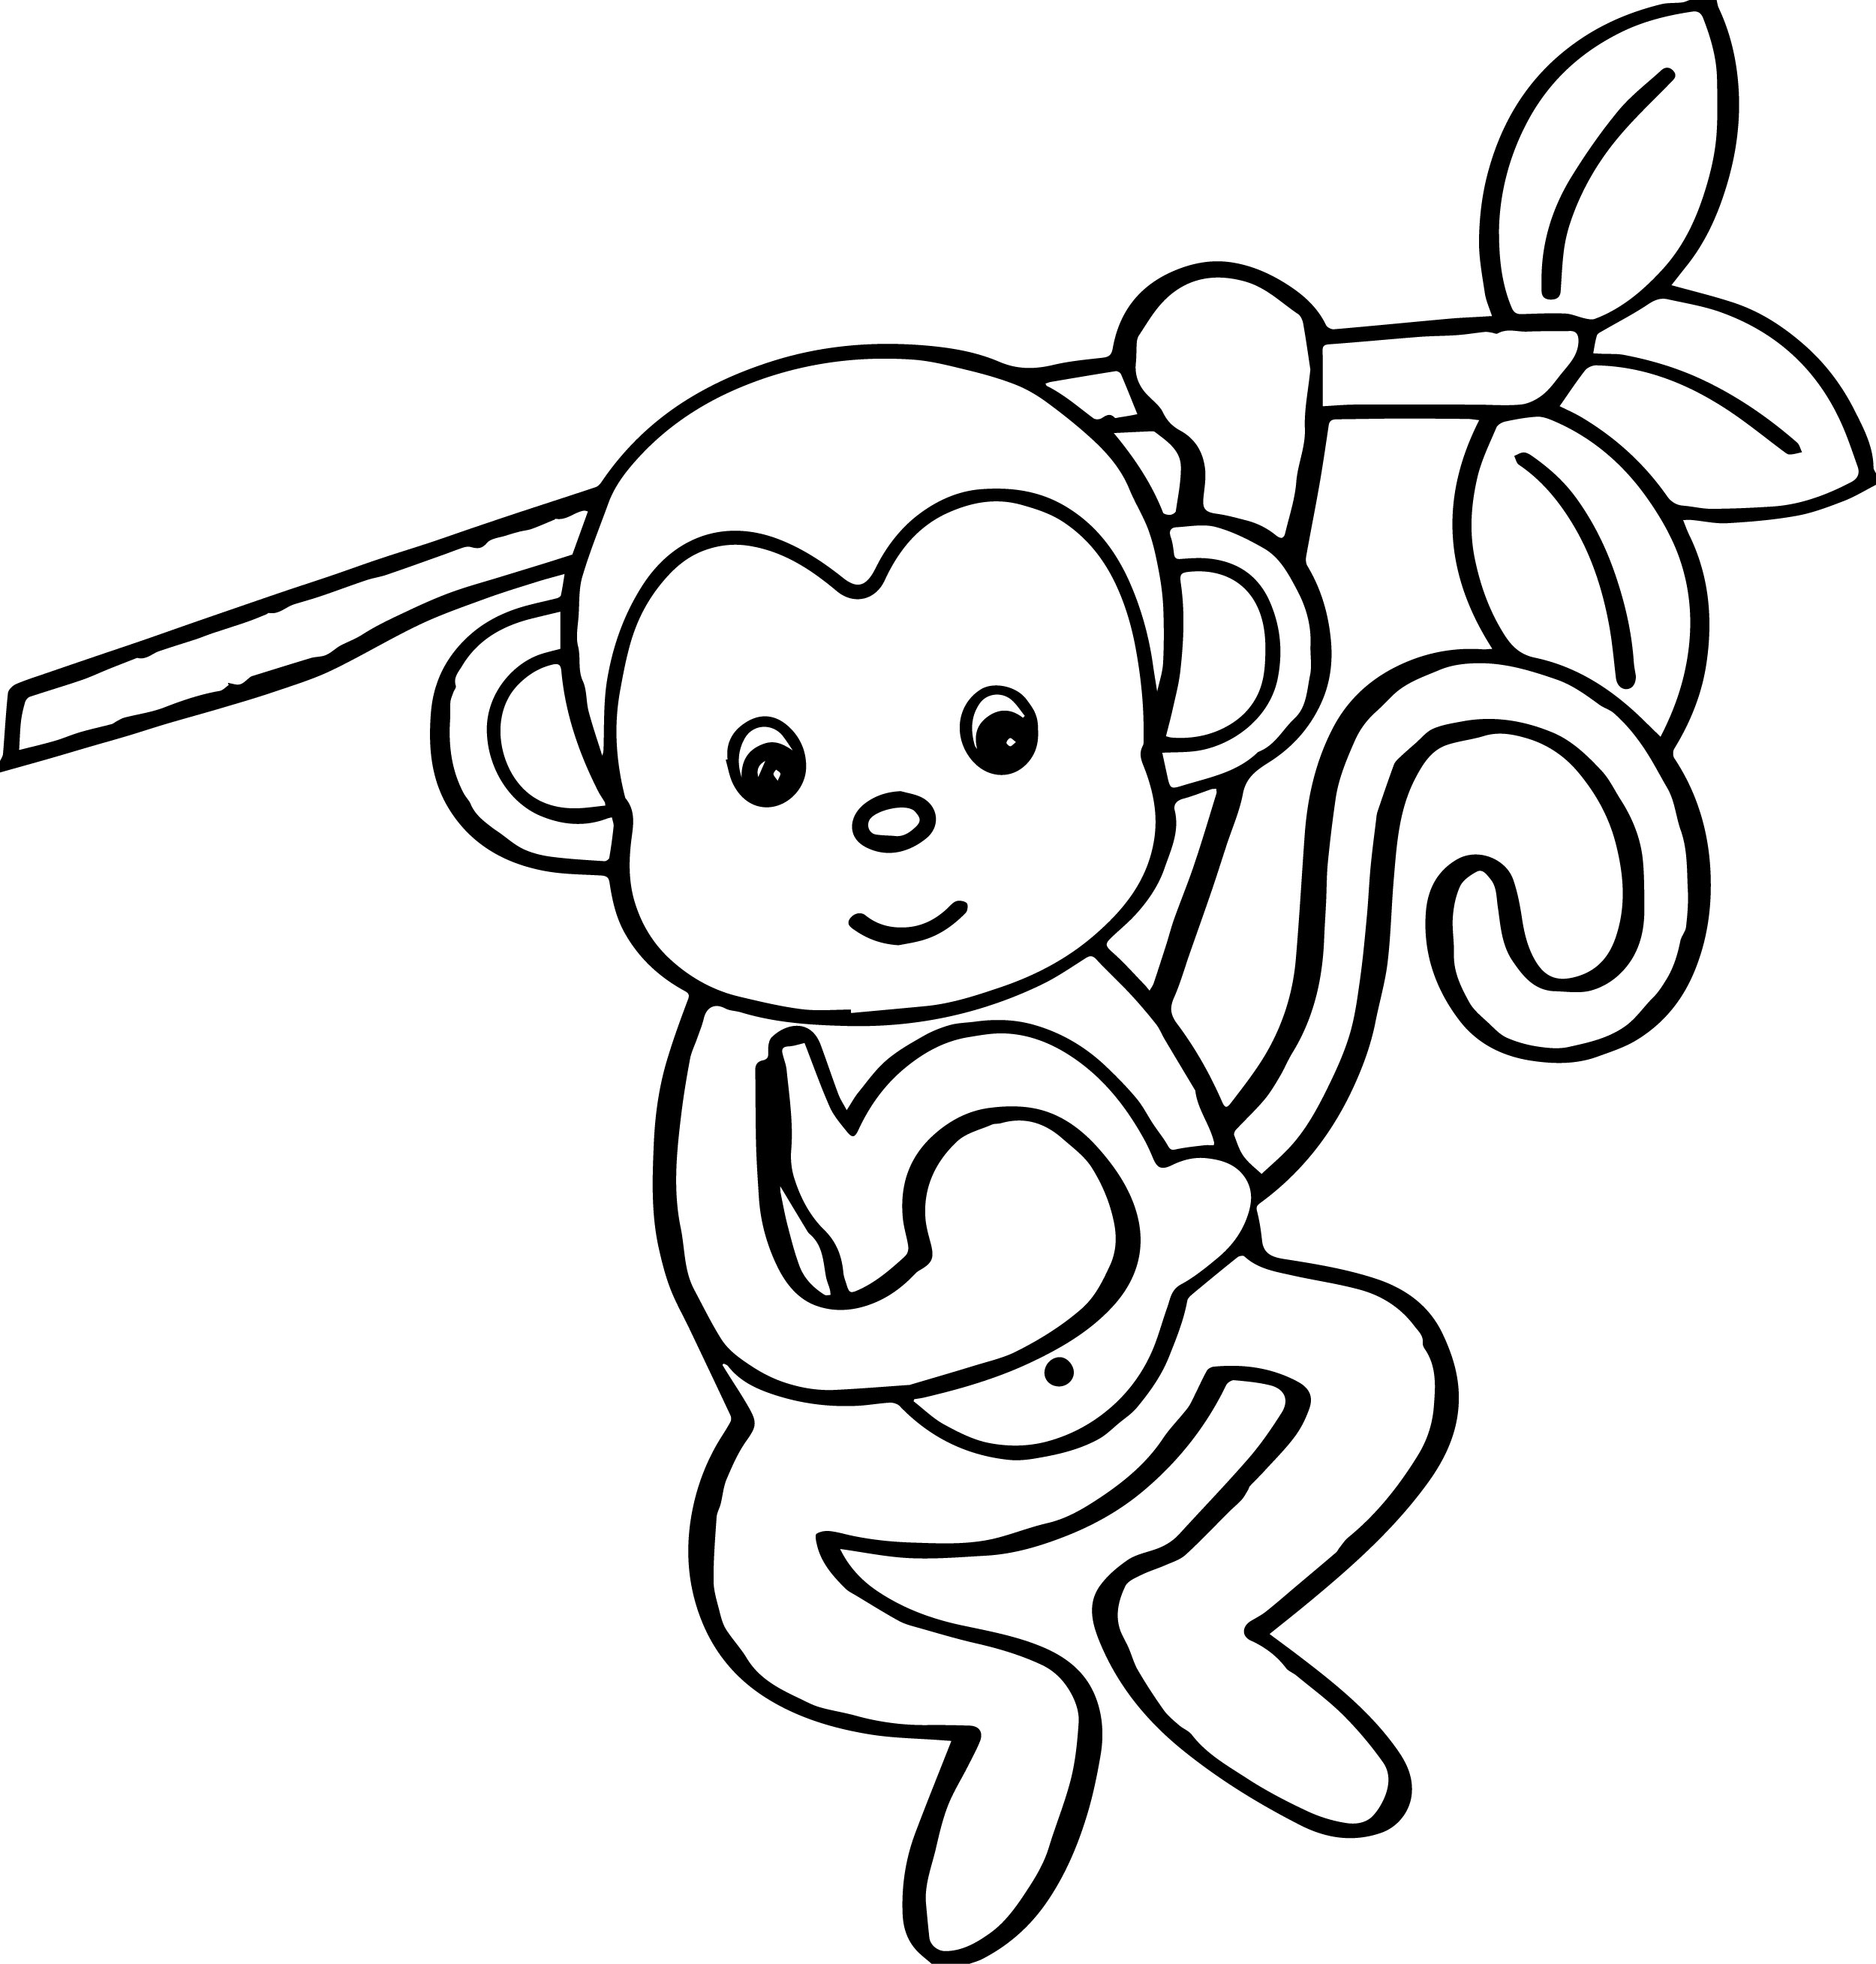 Zoo Coloring Pages Easy / Get This Online Zoo Coloring Pages for Kids ...